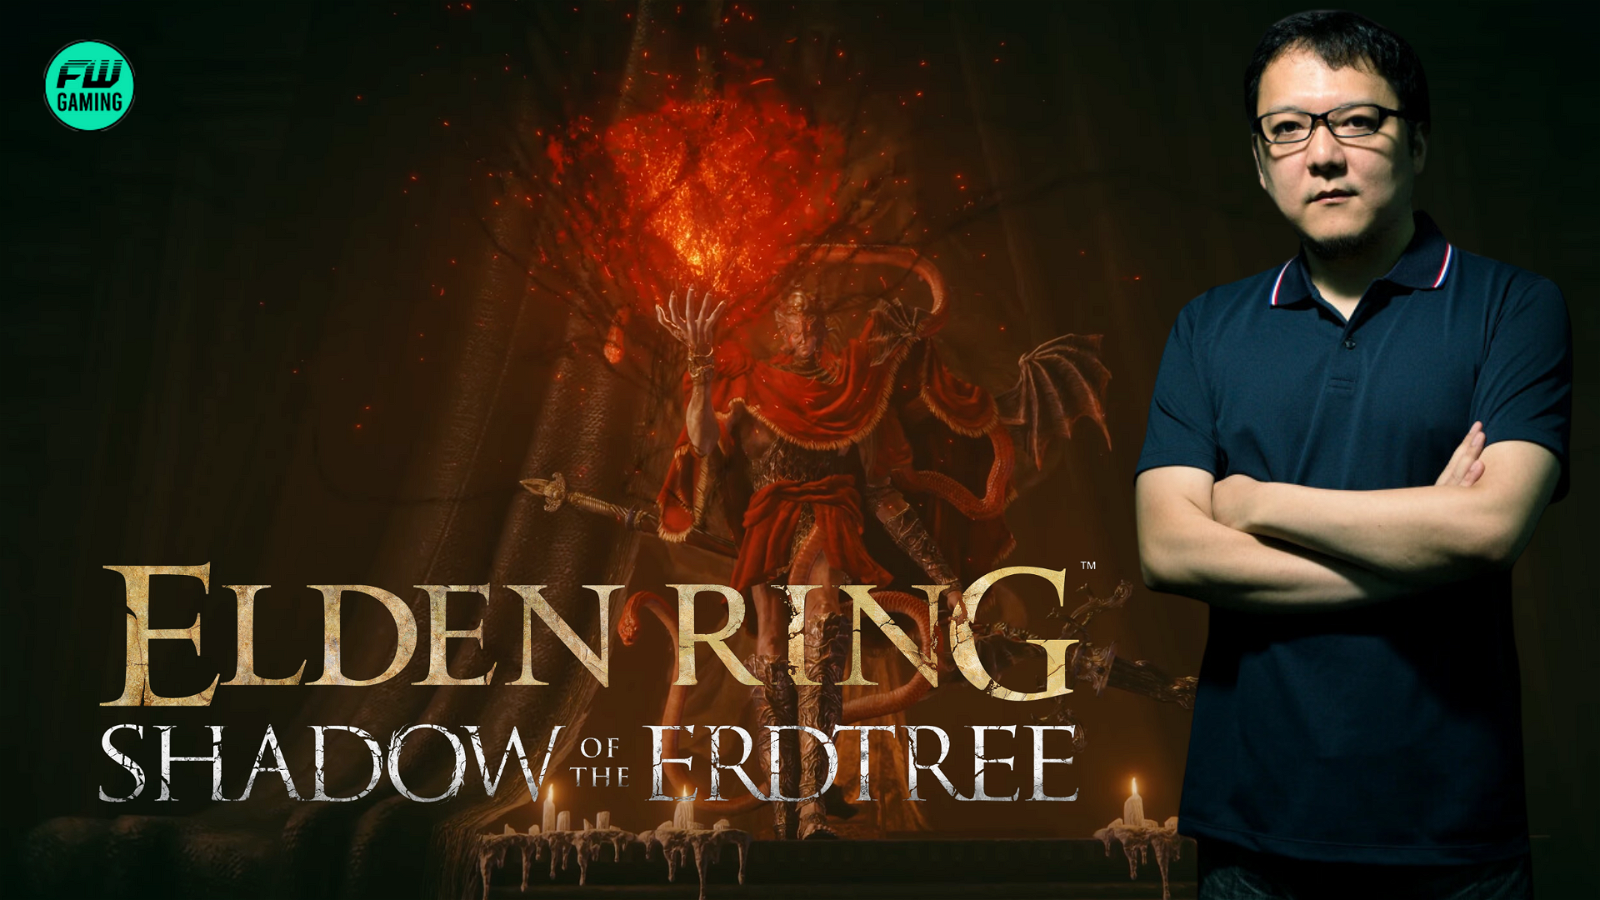 “we’ve also experimented with something…”: If Hidetaka Miyazaki Is to Be Believed, Elden Ring DLC Shadow of the Erdtree Is Mixing Things up for the Soulslike Genre